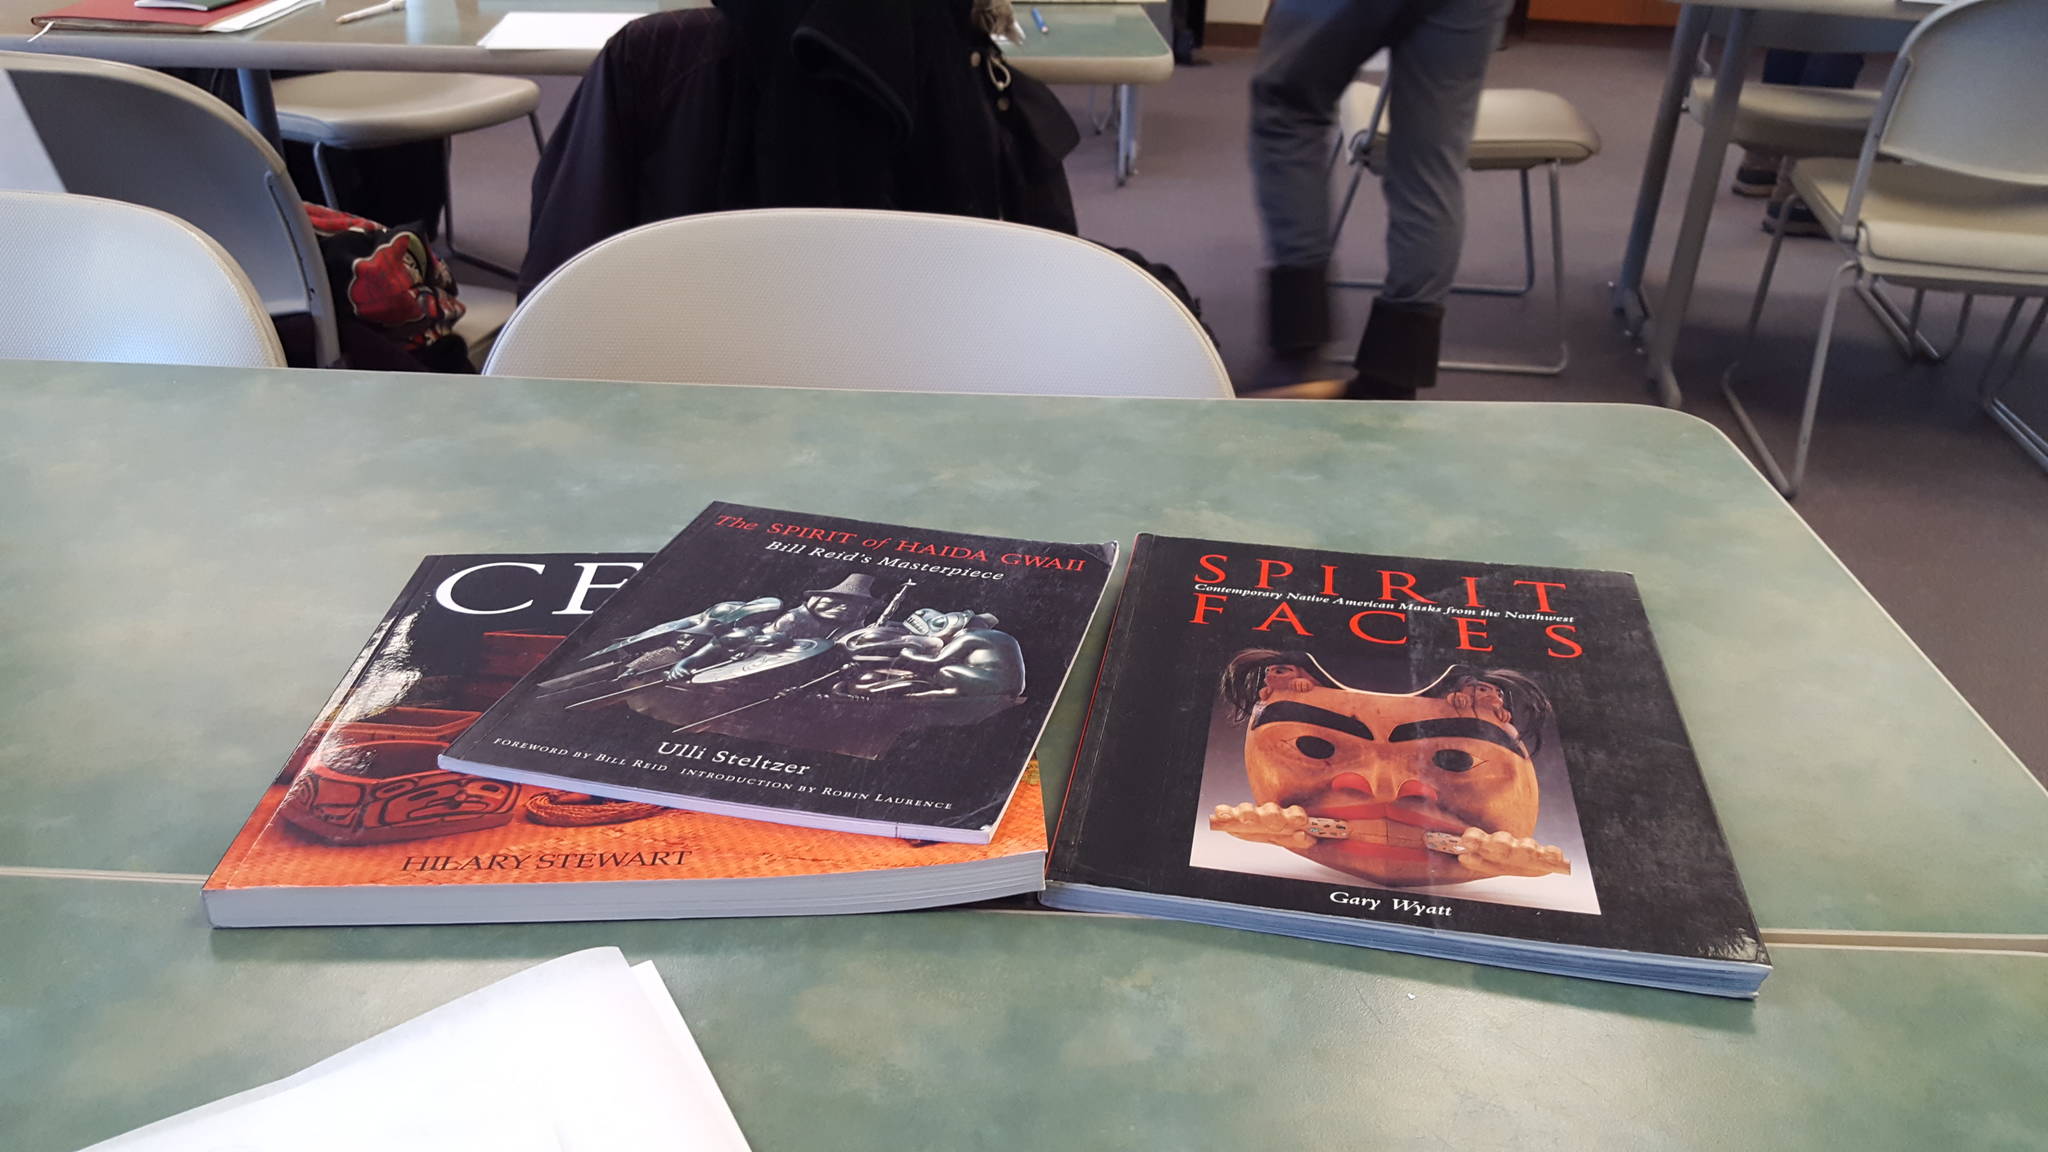 Arts and culture books on Alaska Native peoples from Xh’unei Lance Twitchell’s personal collection sit on a table for workshop participants to thumb through. Clara Miller | Capital City Weekly